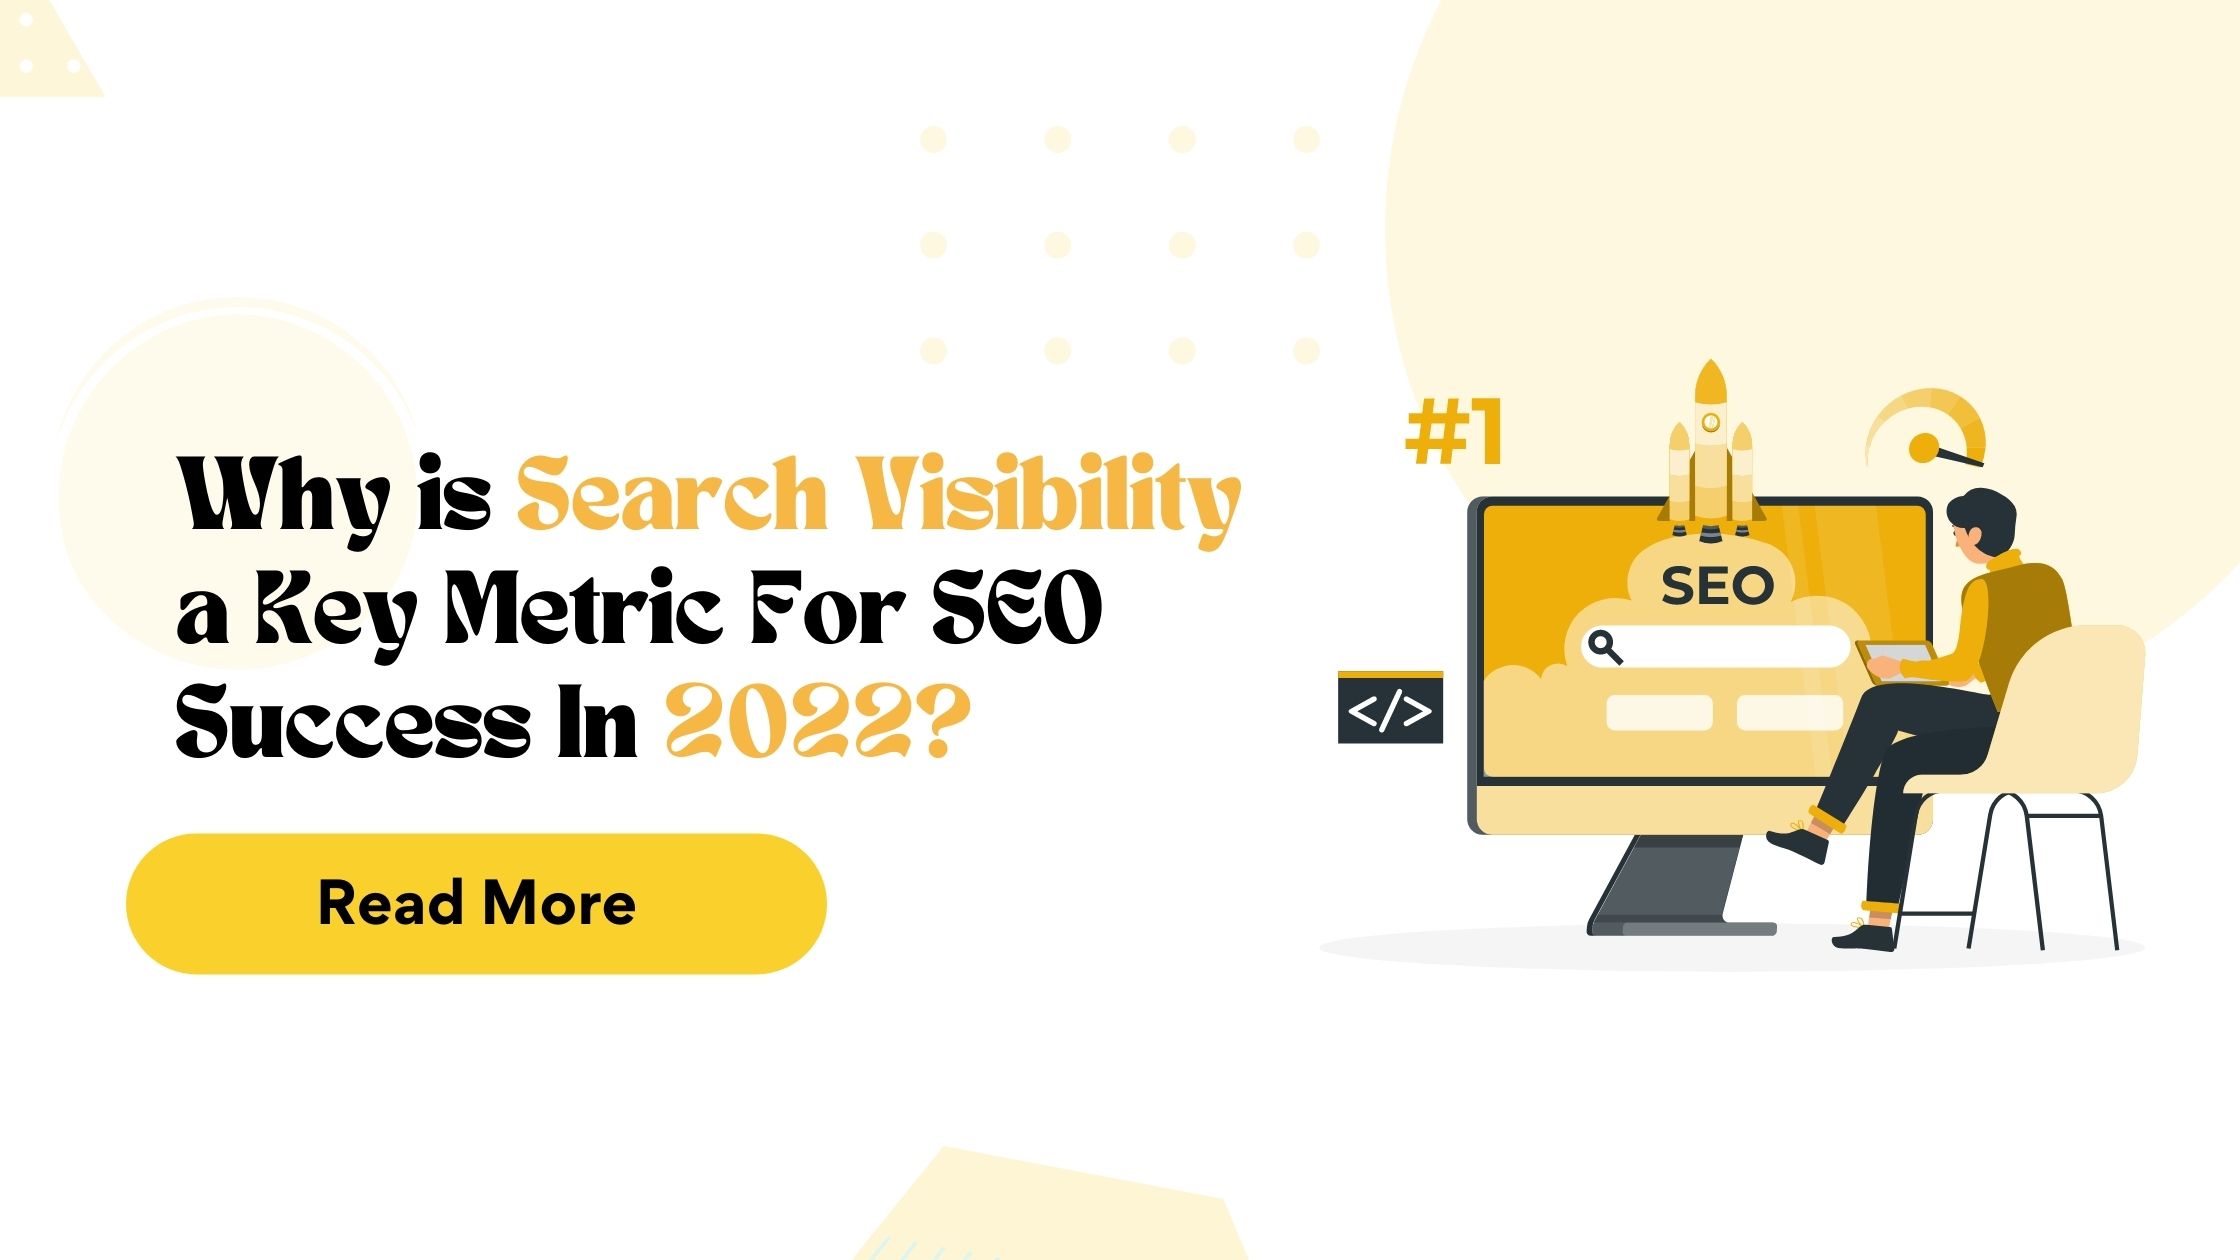 Why Search Visibility Is The Only Key Metric For SEO Success In 2022